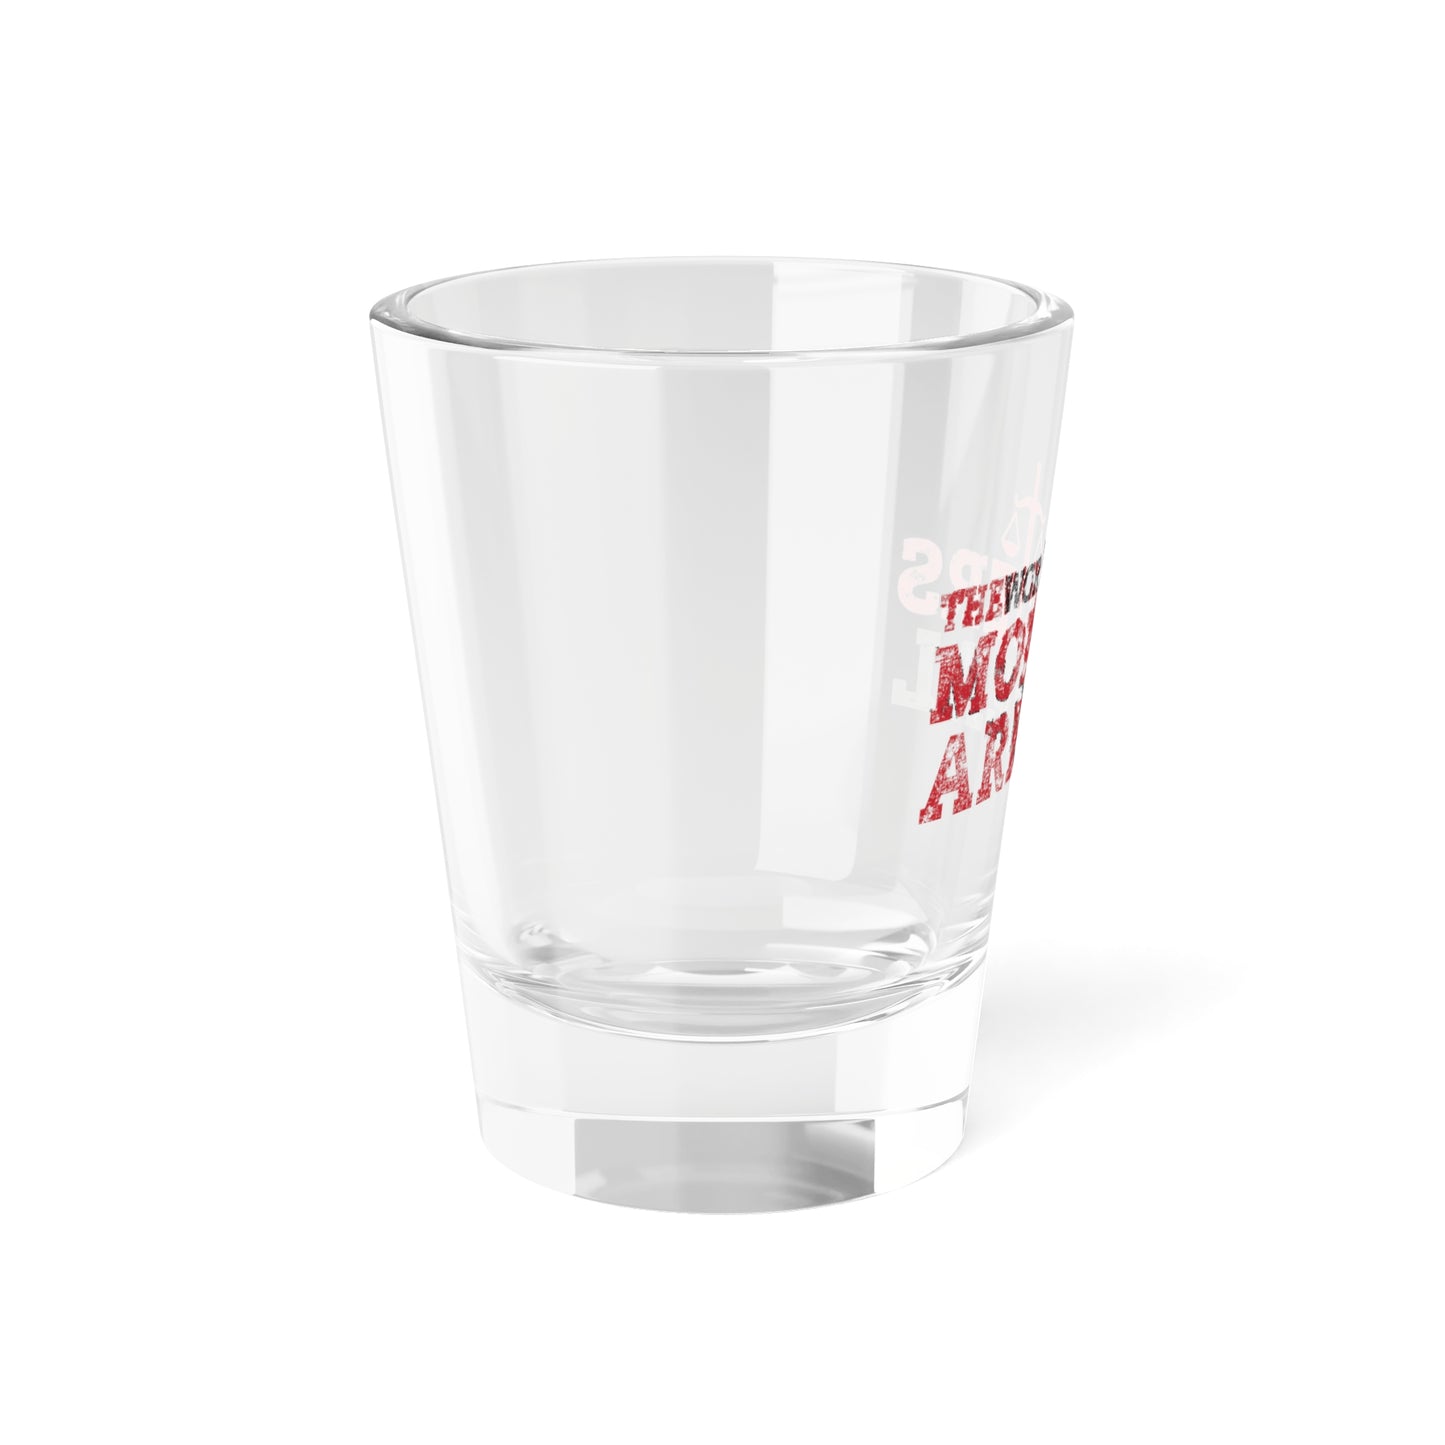 "The Worst Monsters" Shot Glass, 1.5oz